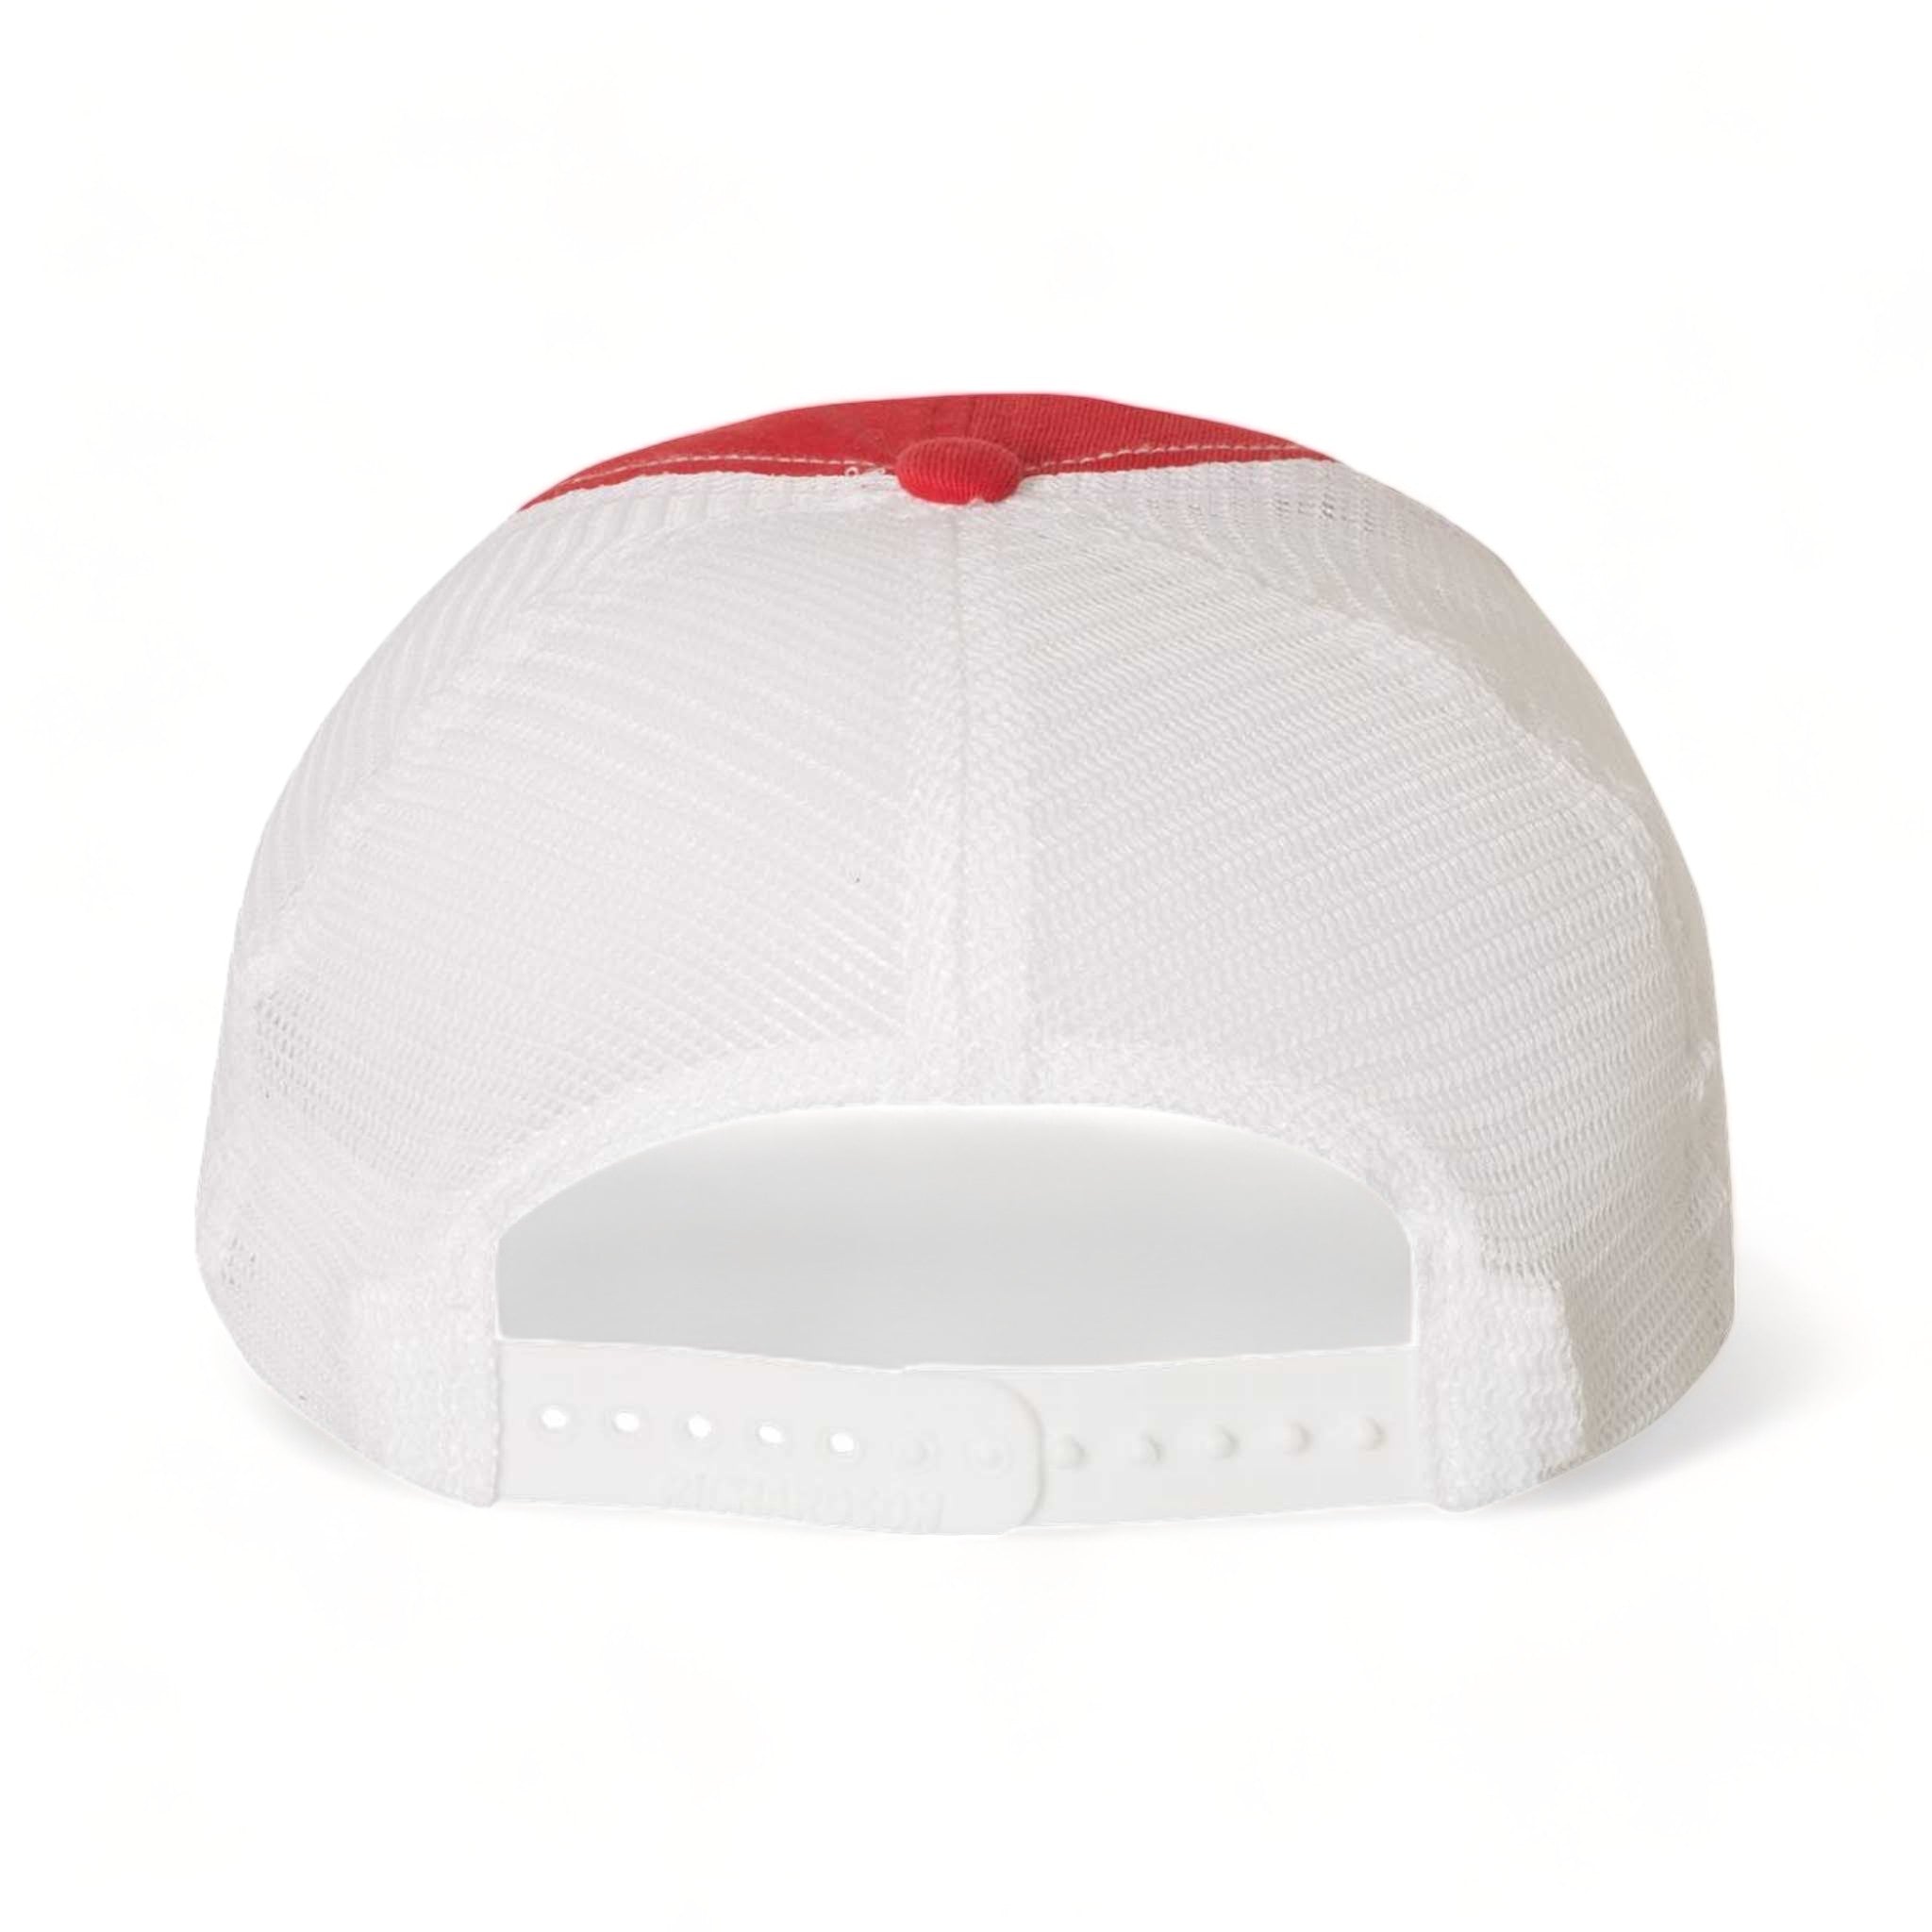 Back view of Richardson 111 custom hat in red and white